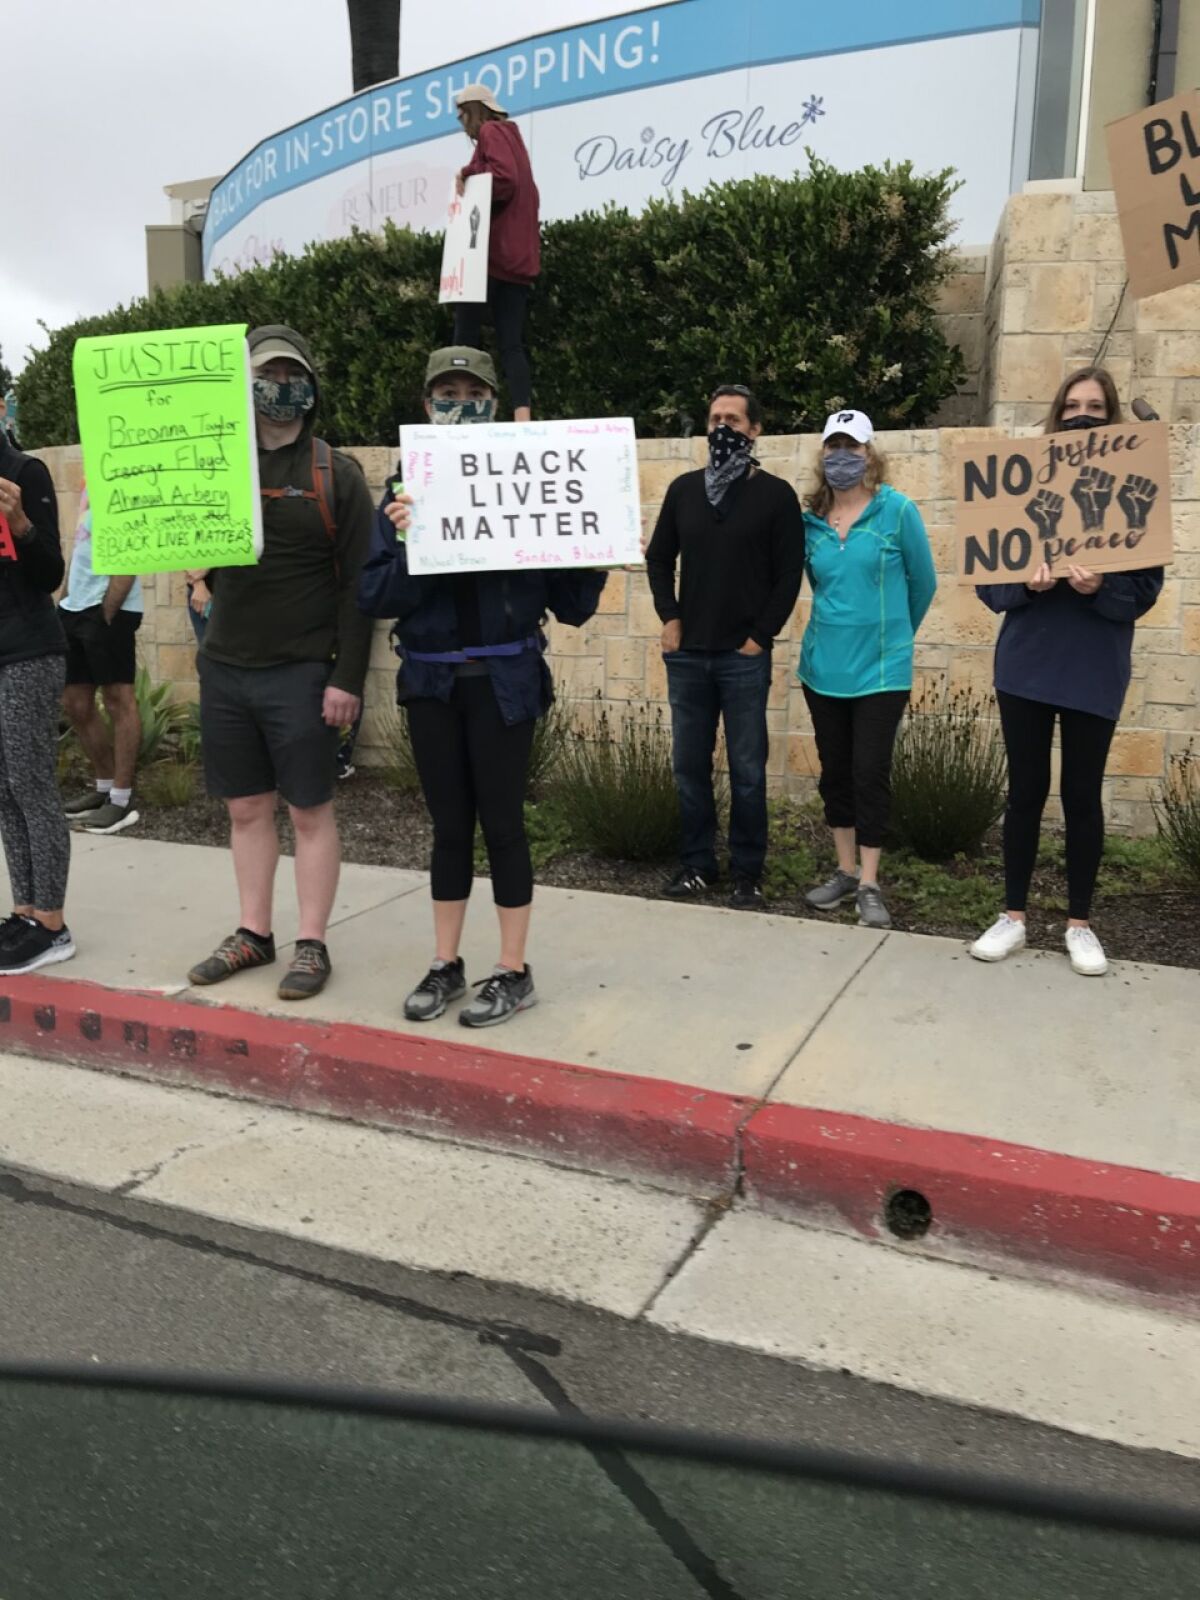 Photos on this page were taken at the peaceful protest in Carmel Valley.